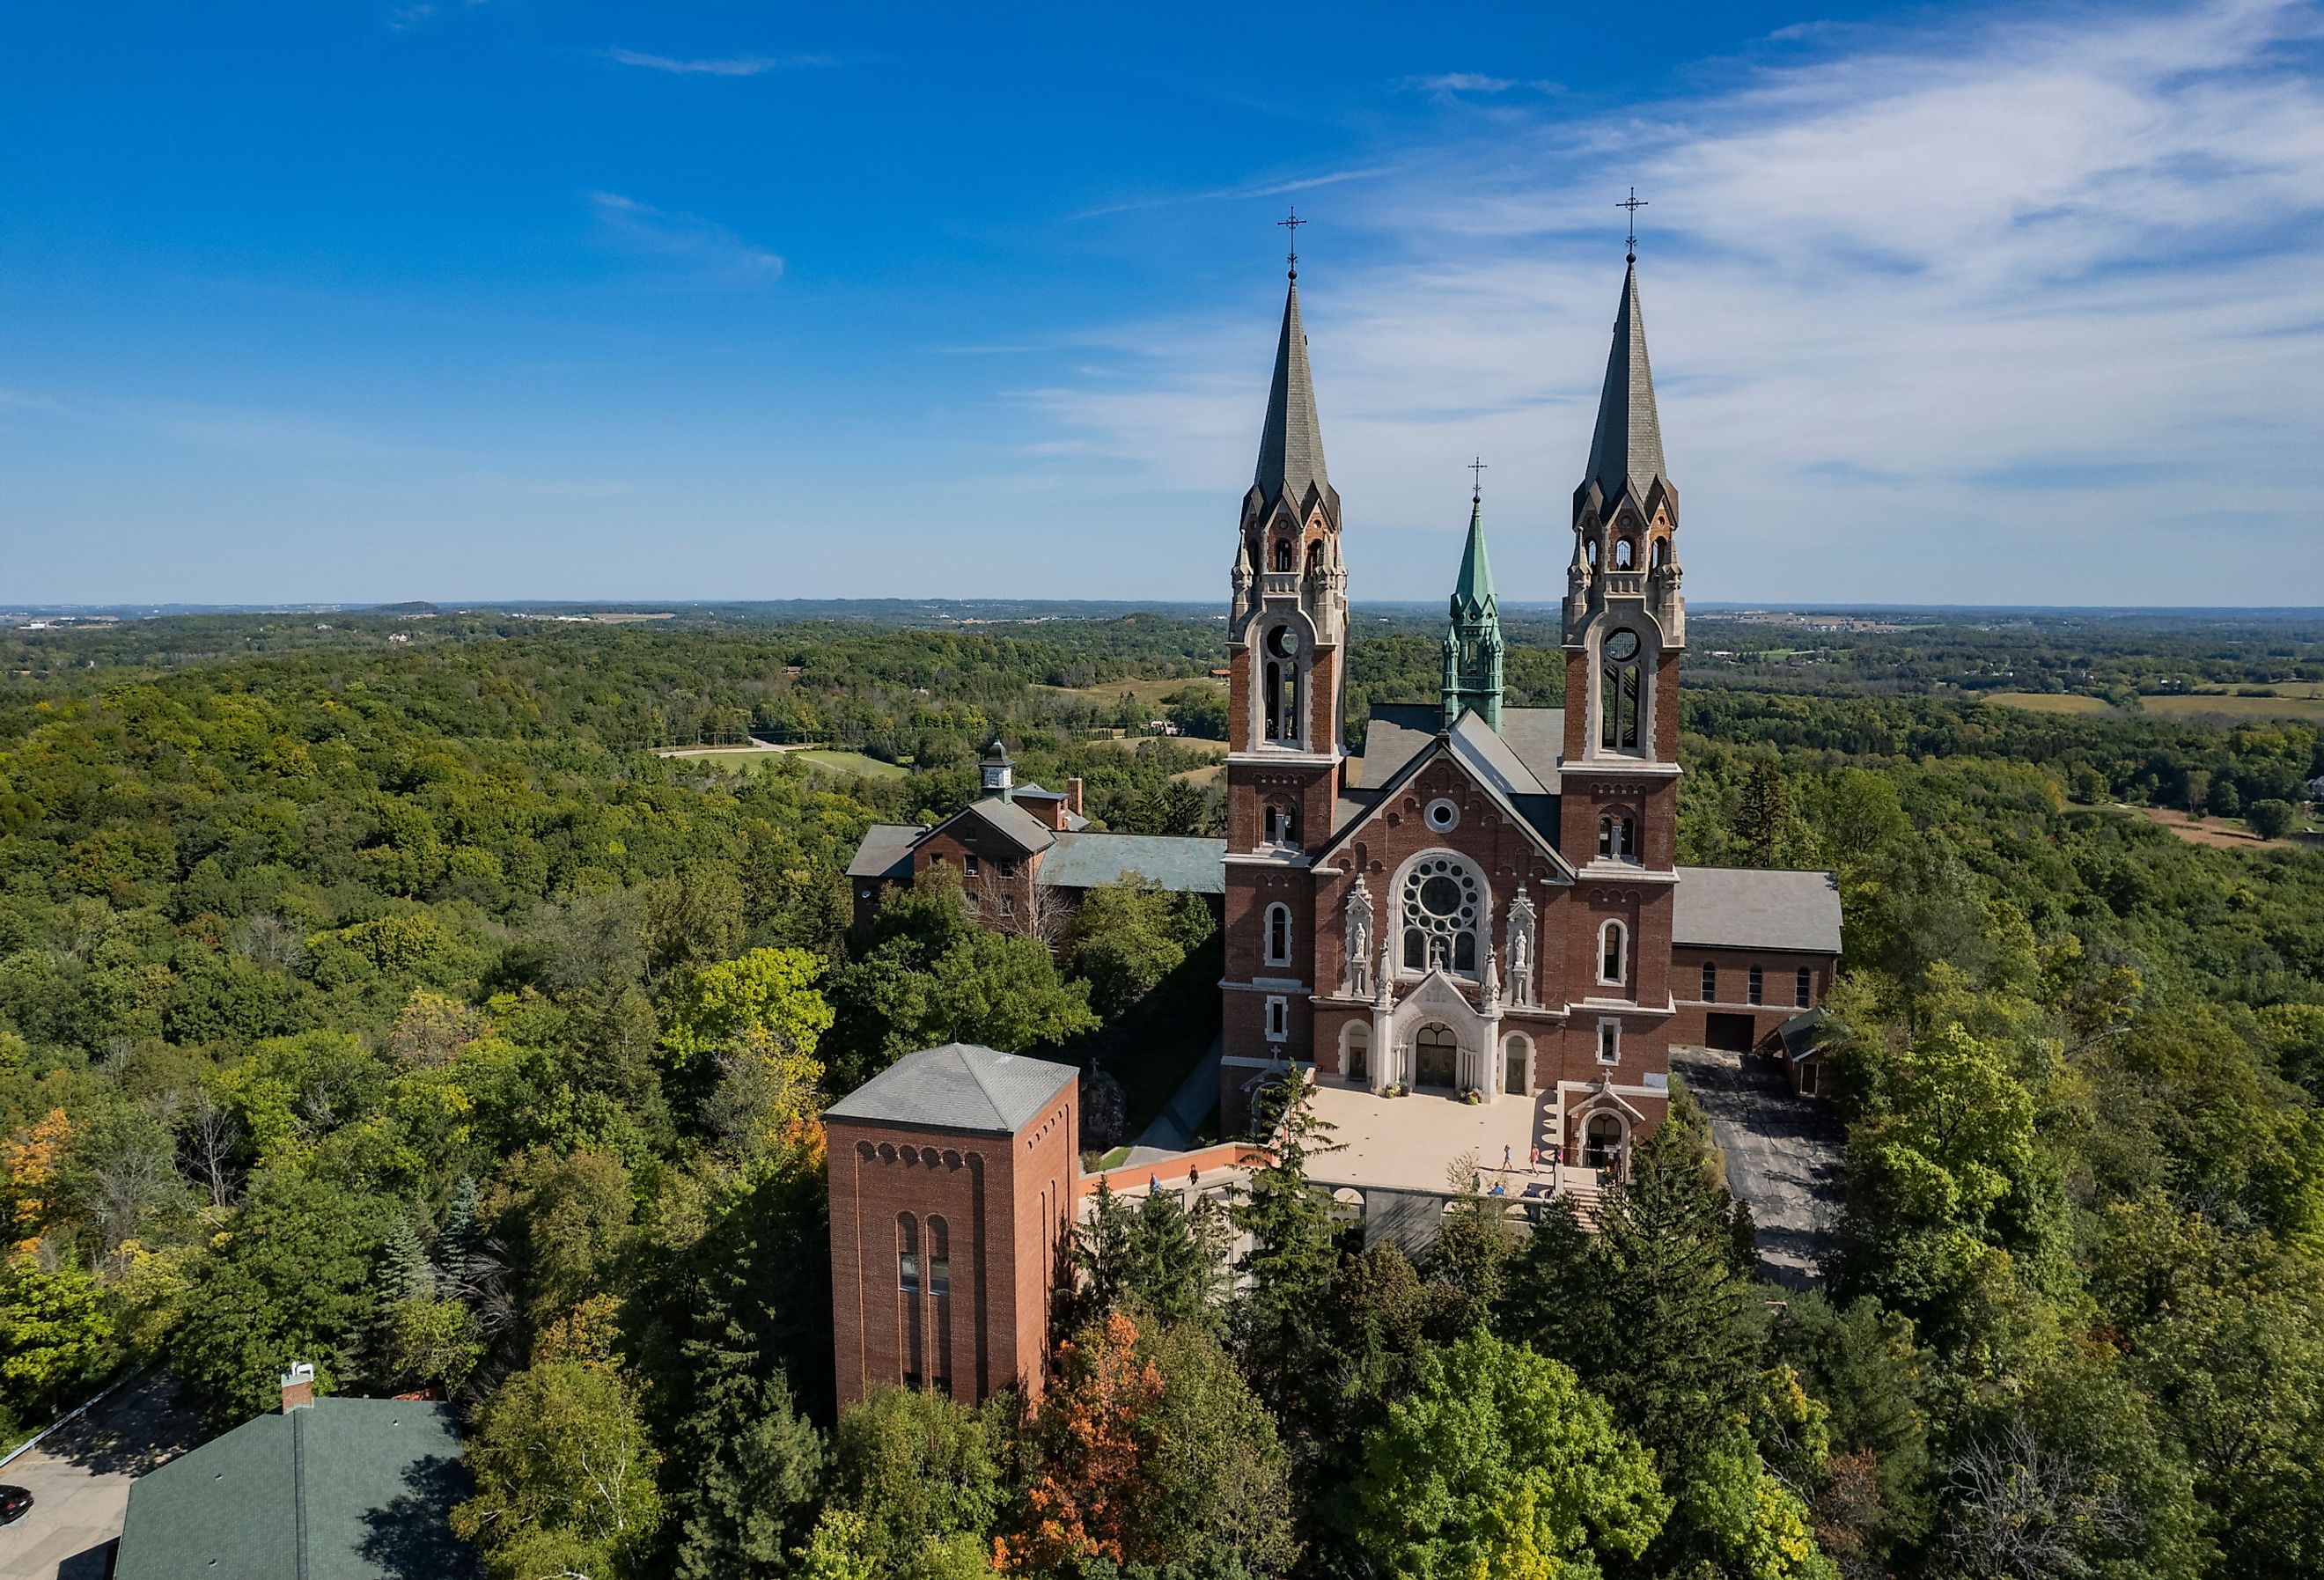 Holy Hill Basilica and National Shrine of Mary in Hubertus, Wisconsin.